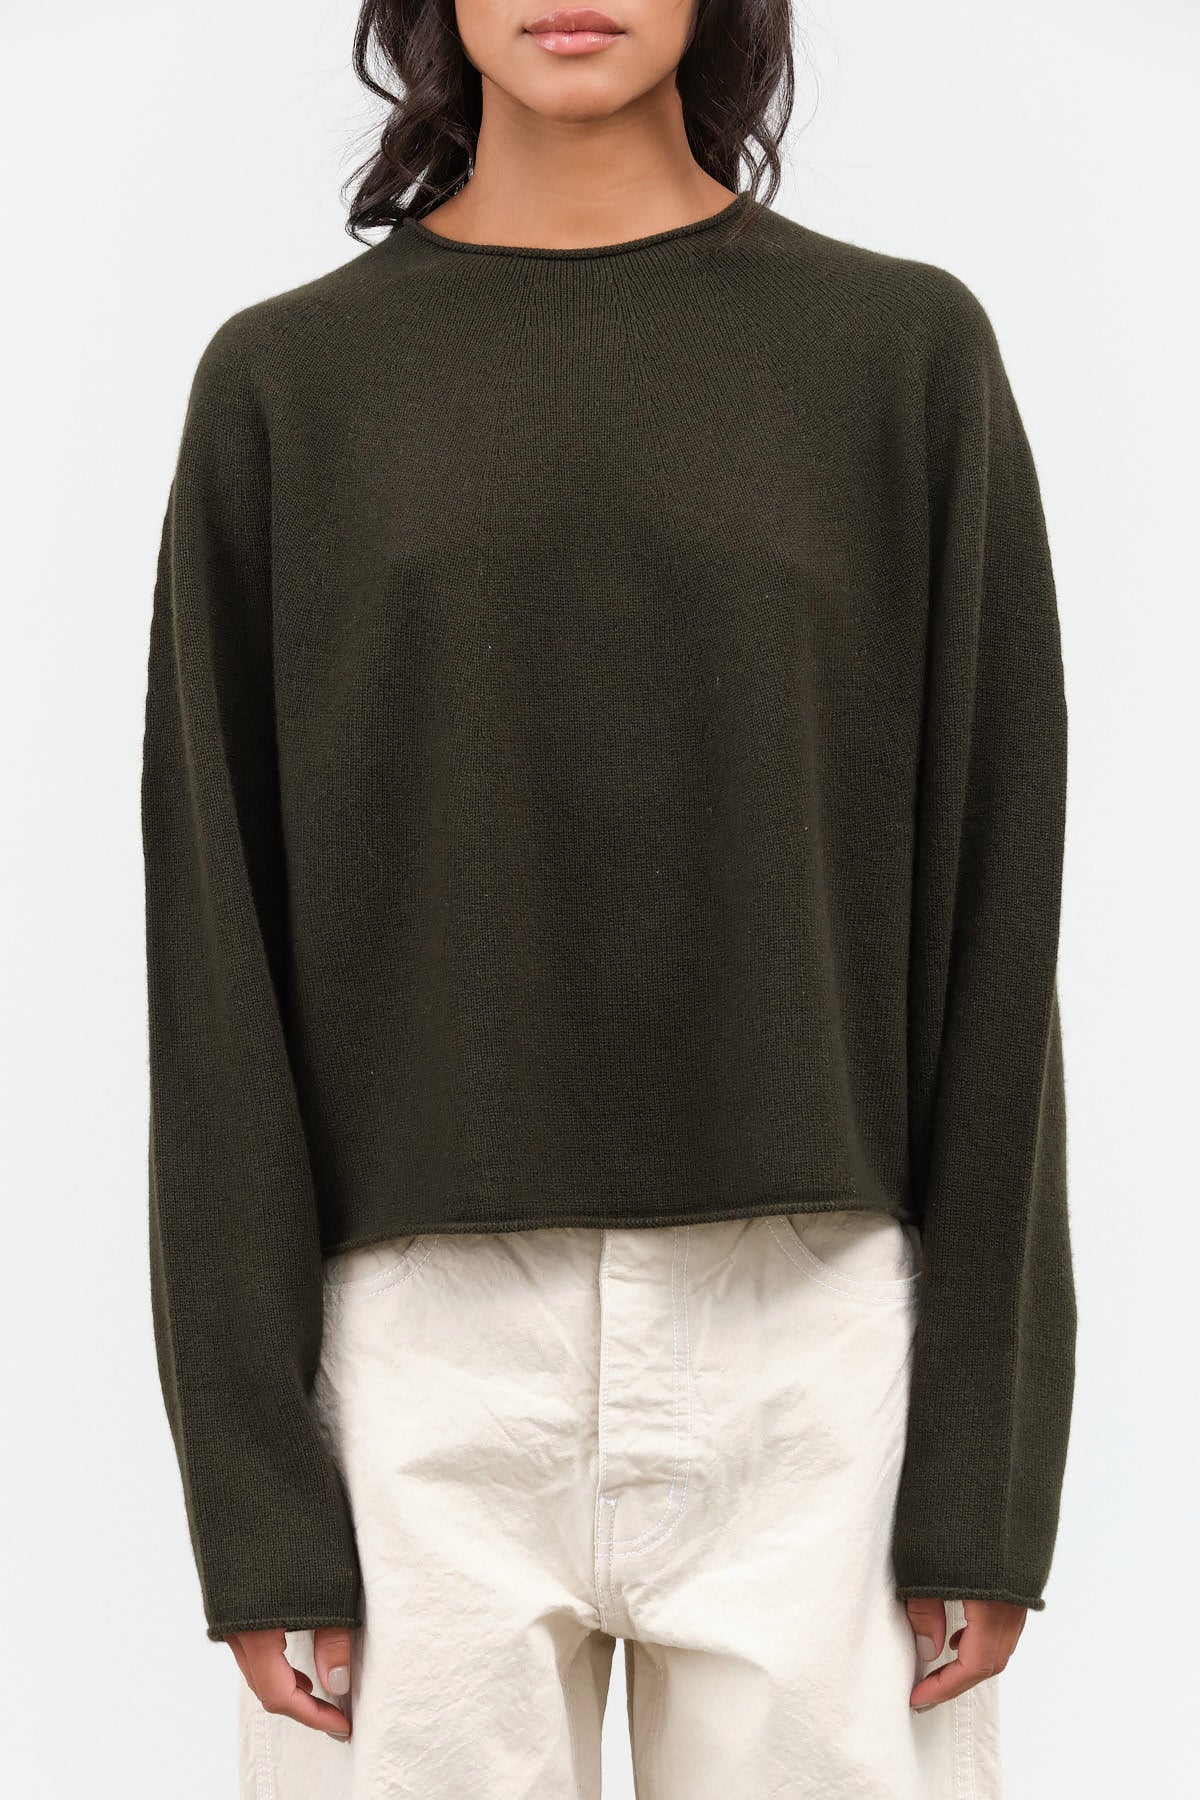 Kishiki Sweater by Christian Wijnants in Military Green